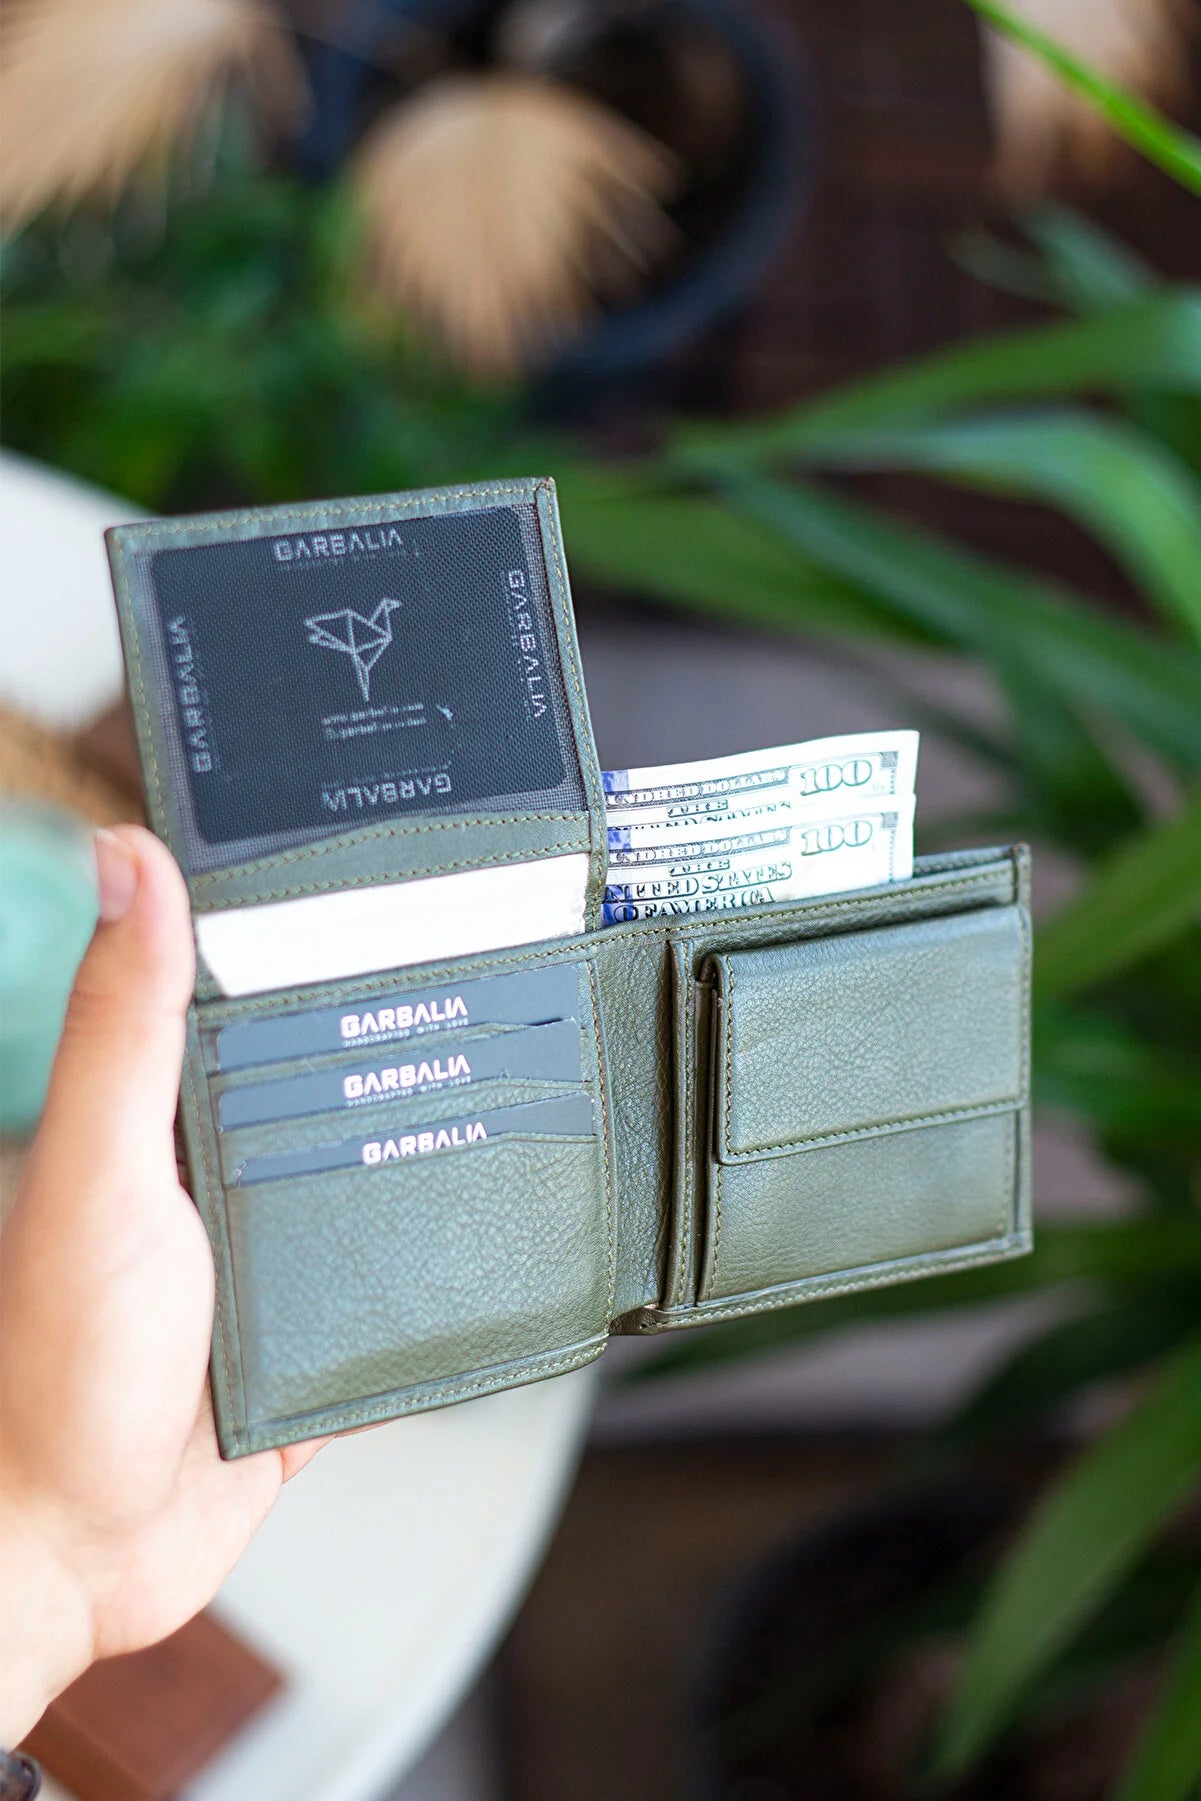 Jackson Genuine Leather RFID Blocking Khaki Green Wallet with Coin Compartment for Men: A Stylish and Secure Choice